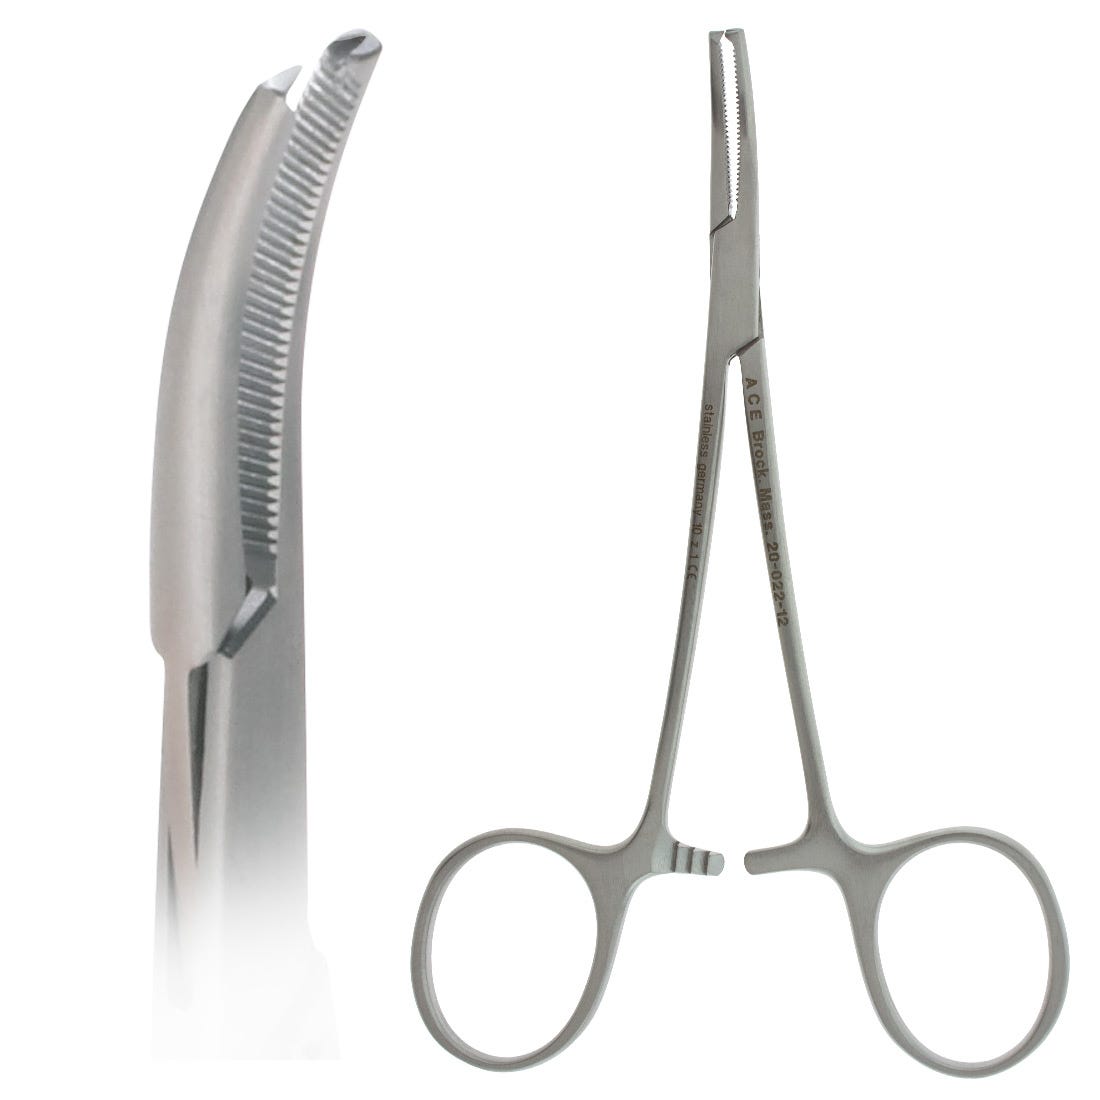 ACE Halsted Mosquito Forceps, curved, 1x2 teeth